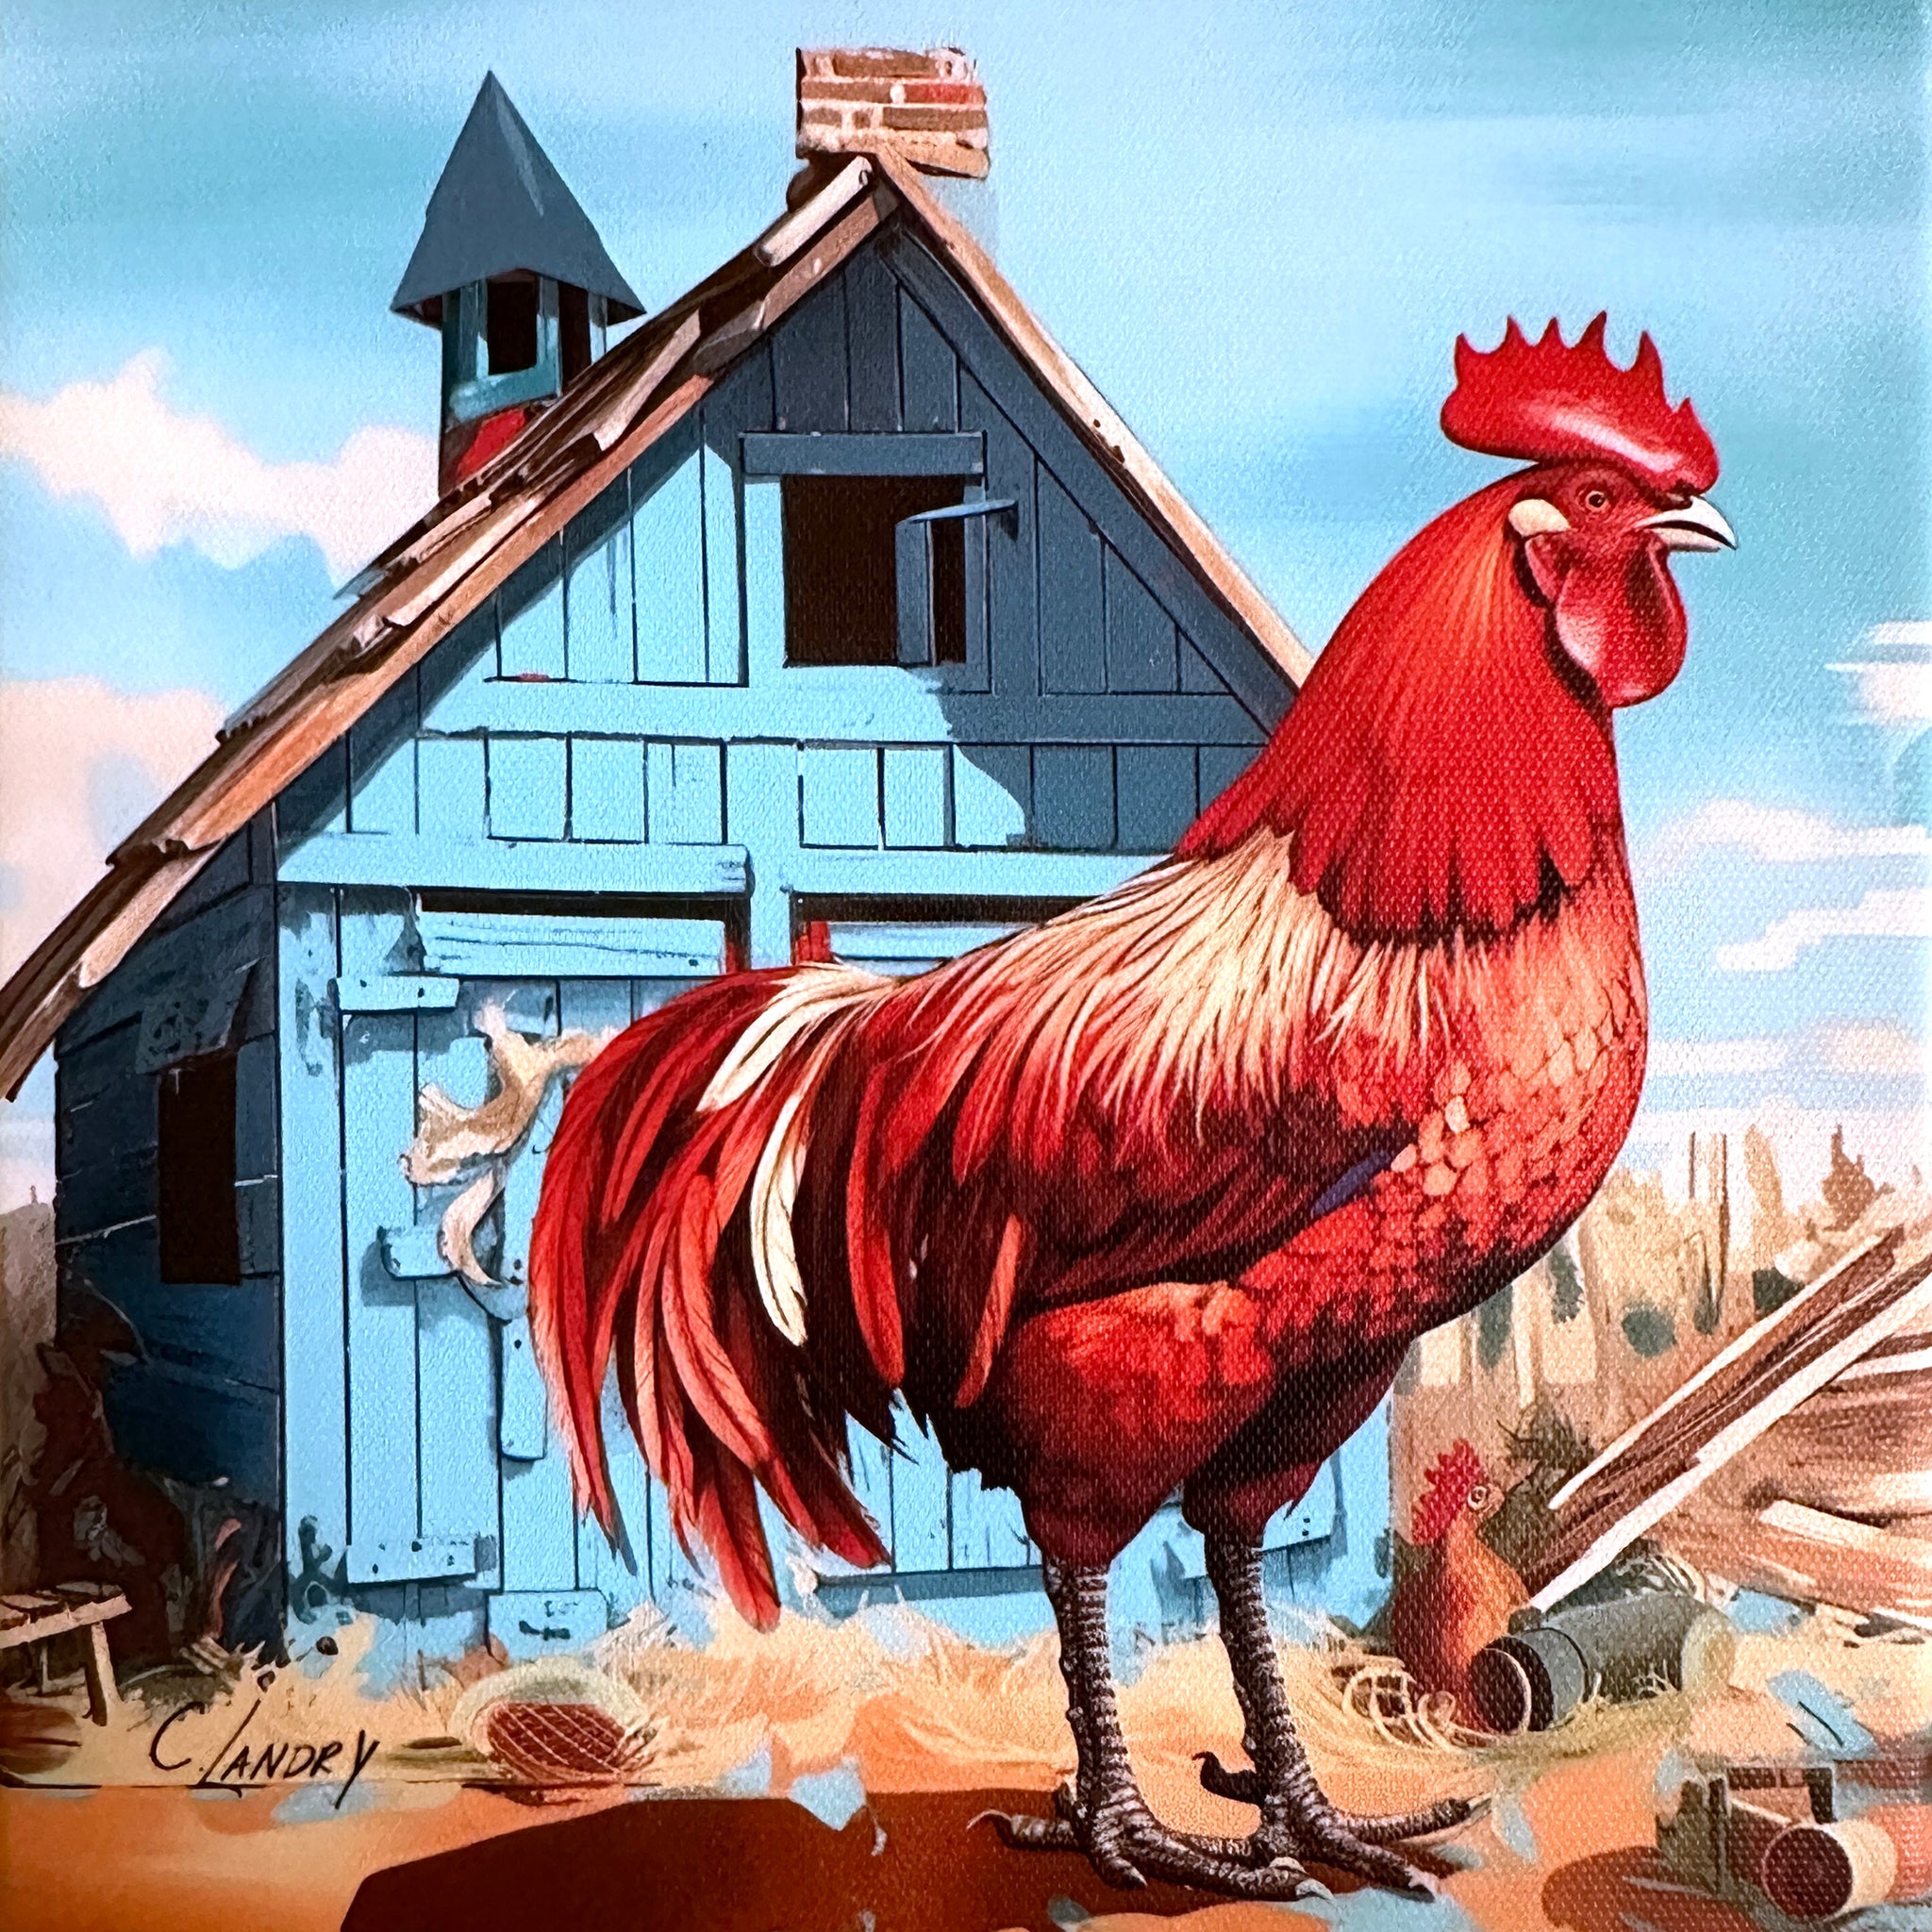 Rooster/Blue Barn on 8"x8" Canvas